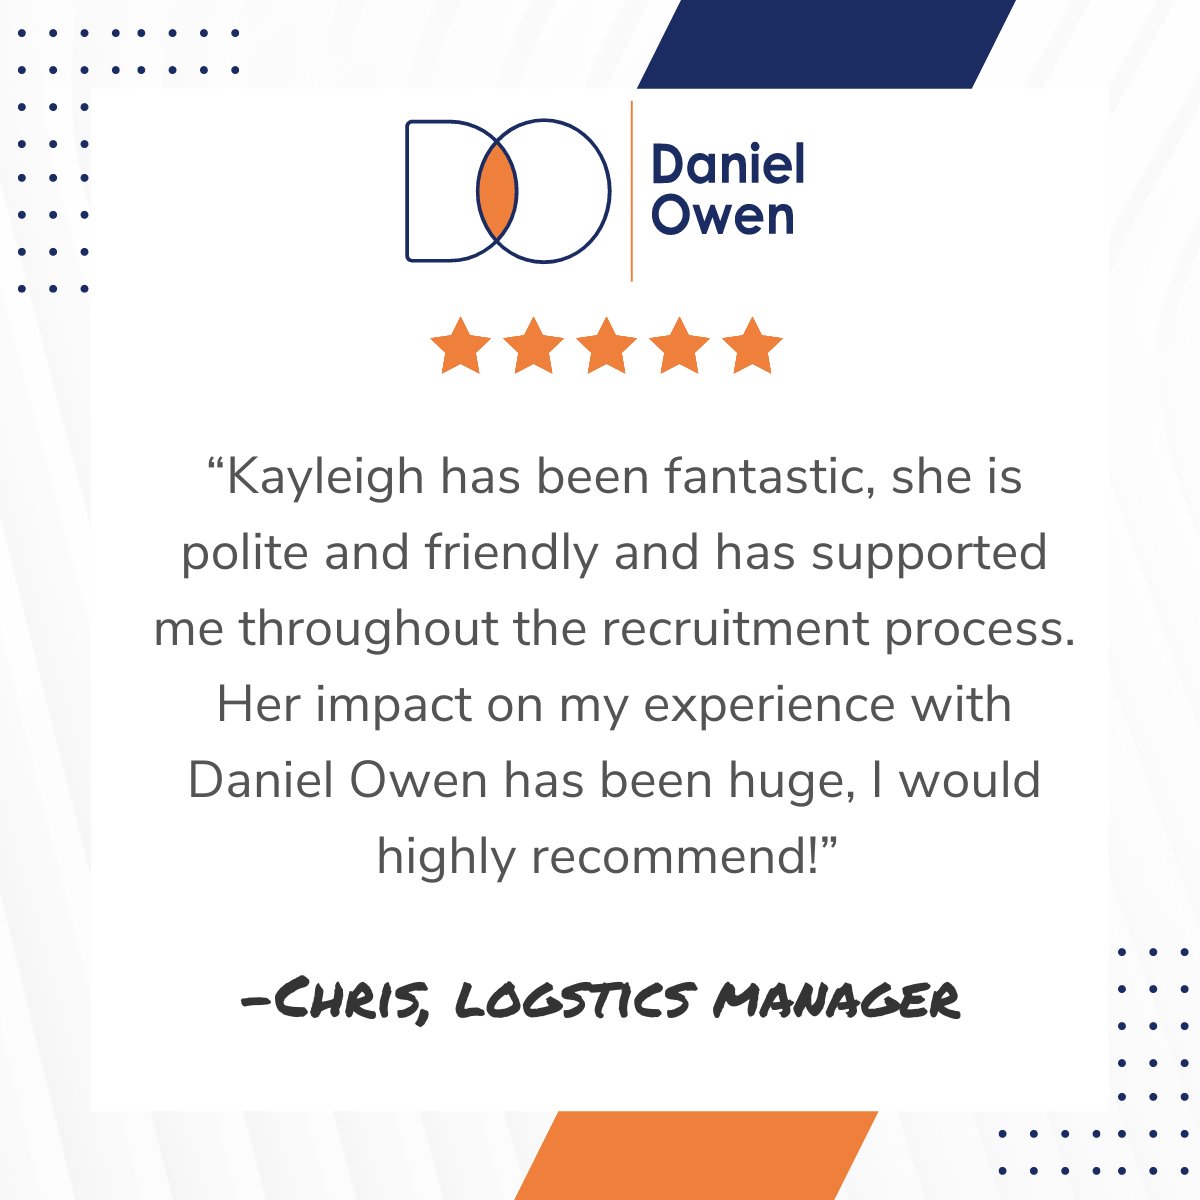 𝗛𝗮𝗽𝗽𝘆 𝗙𝗿𝗶𝗱𝗮𝘆!

Received some more feedback from one of our workers. Thanks,  Chris, for taking the time to let us know!

#DanielOwen #Construction #PropertyServices #ReferaFriend #Feedback